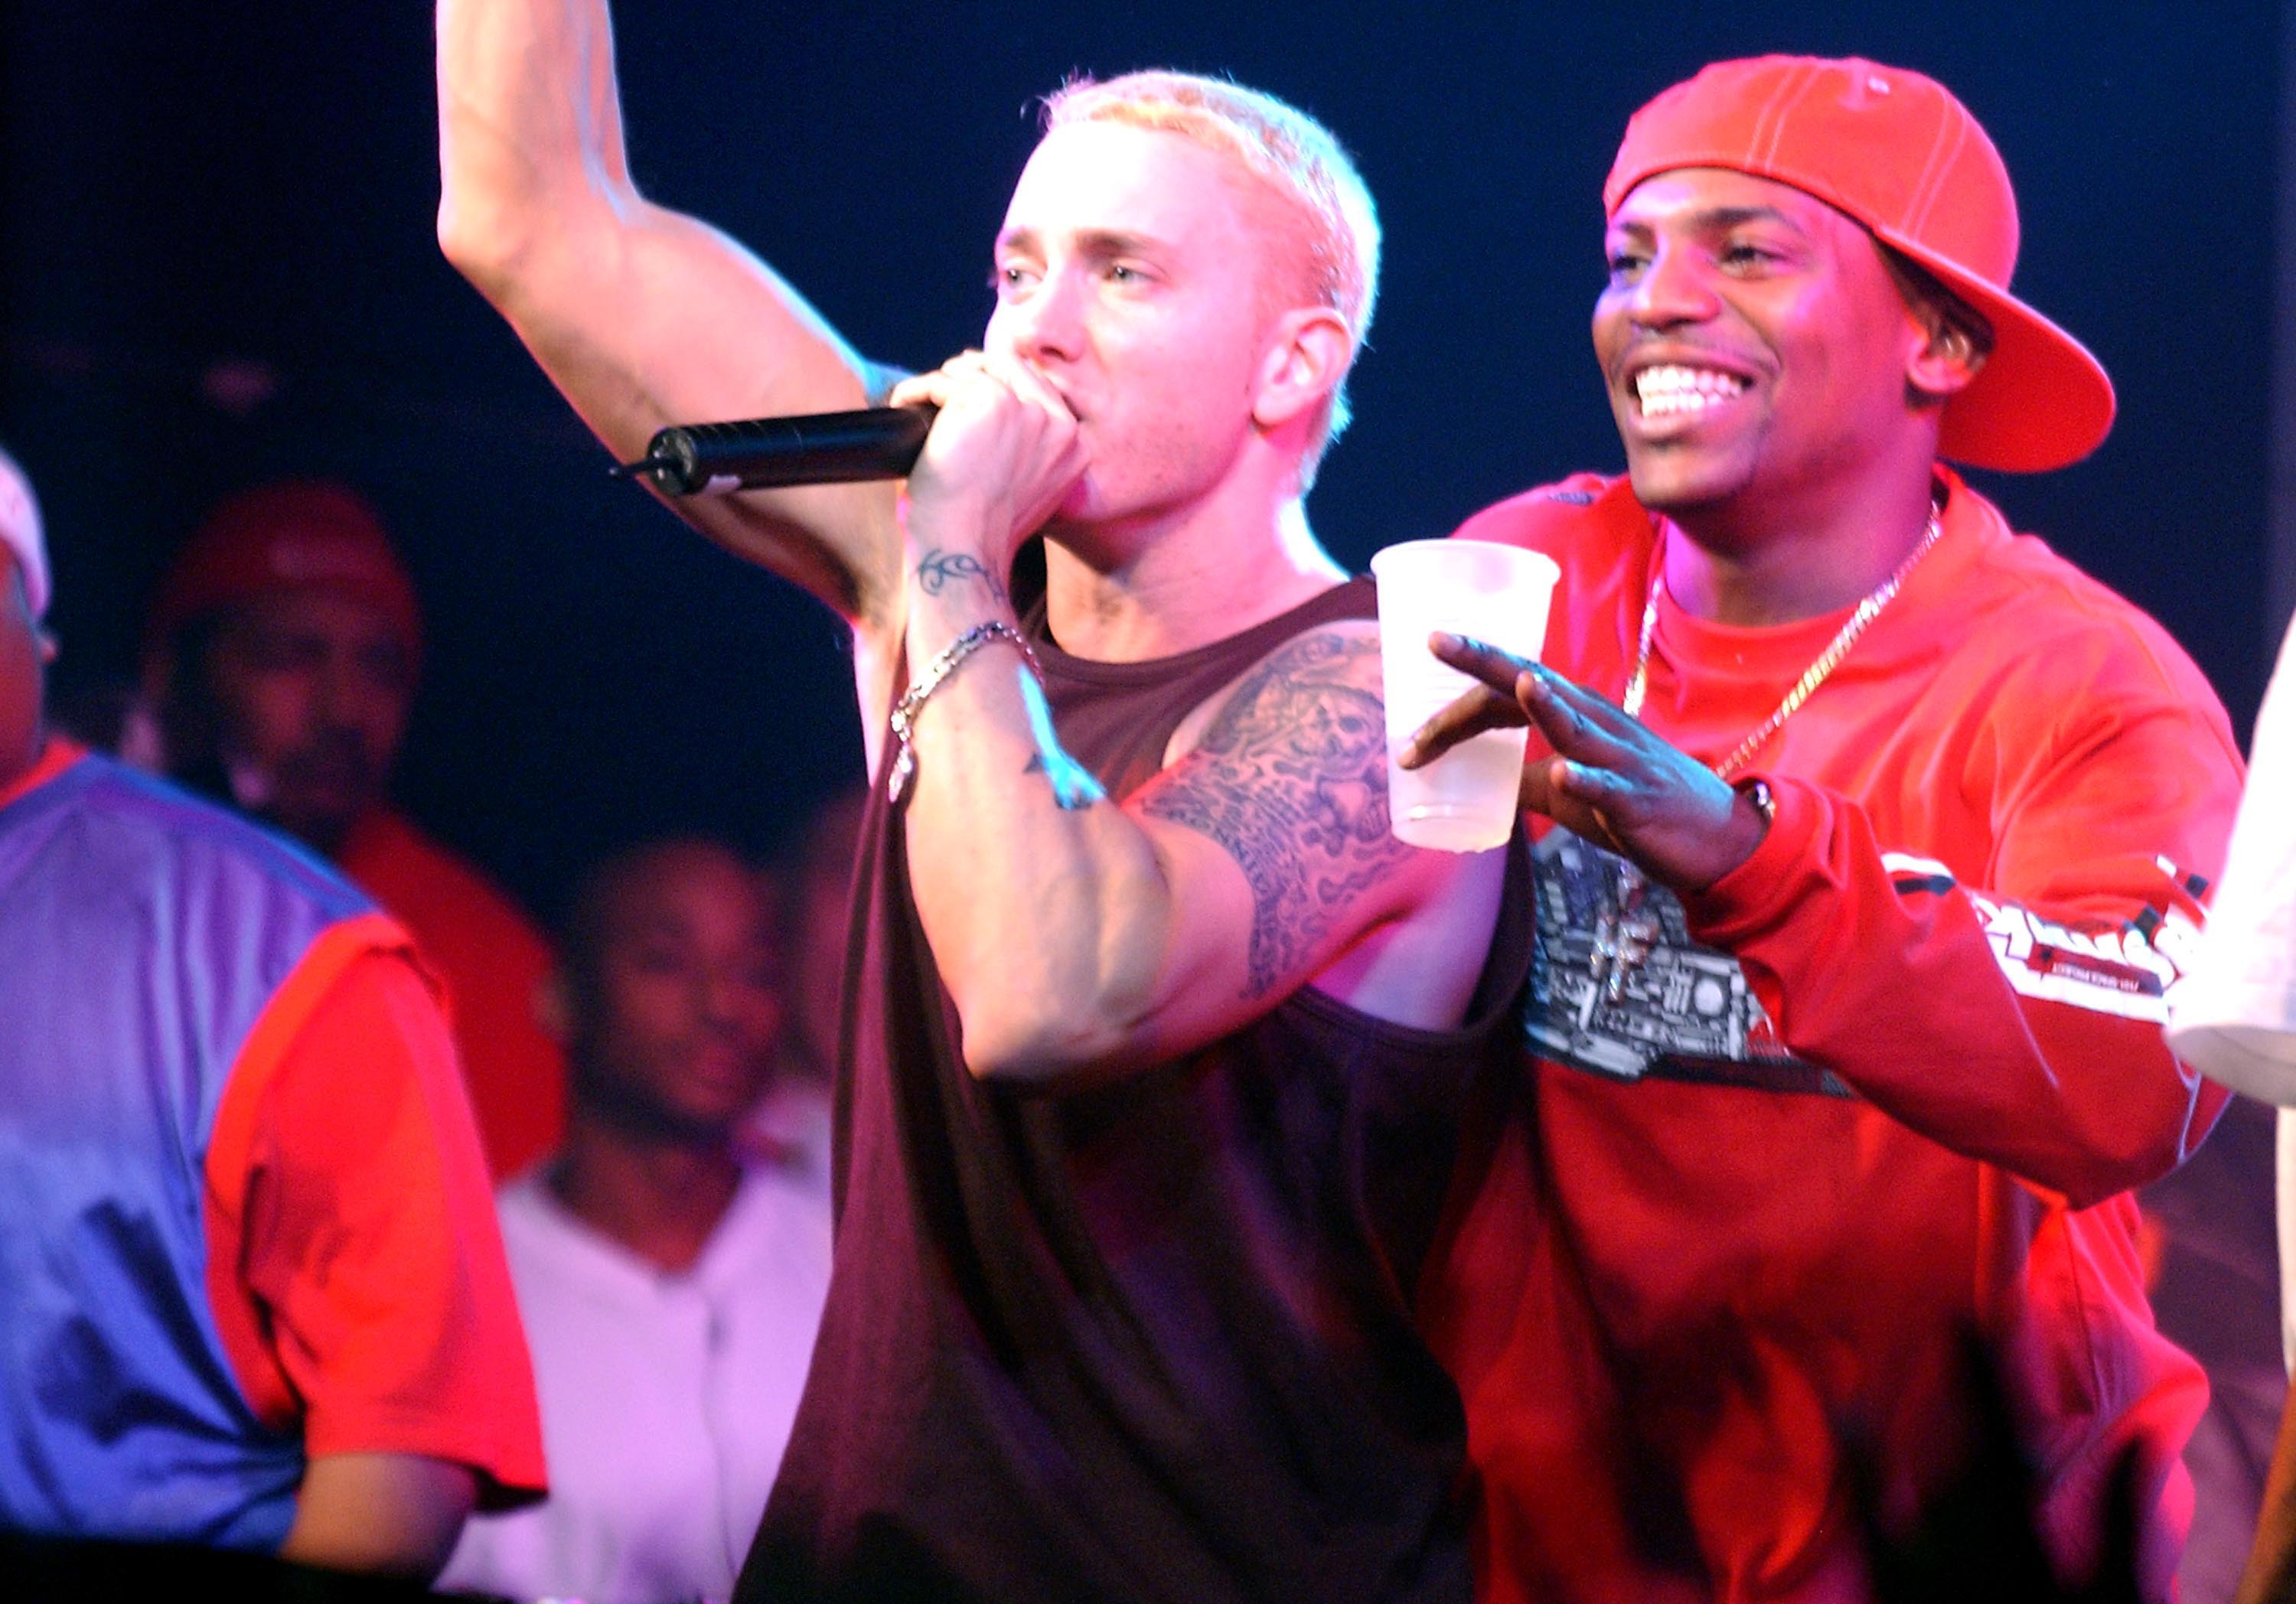 Eminem and Mekhi Phifer perform at the Universal DVD release party for 8 Mile